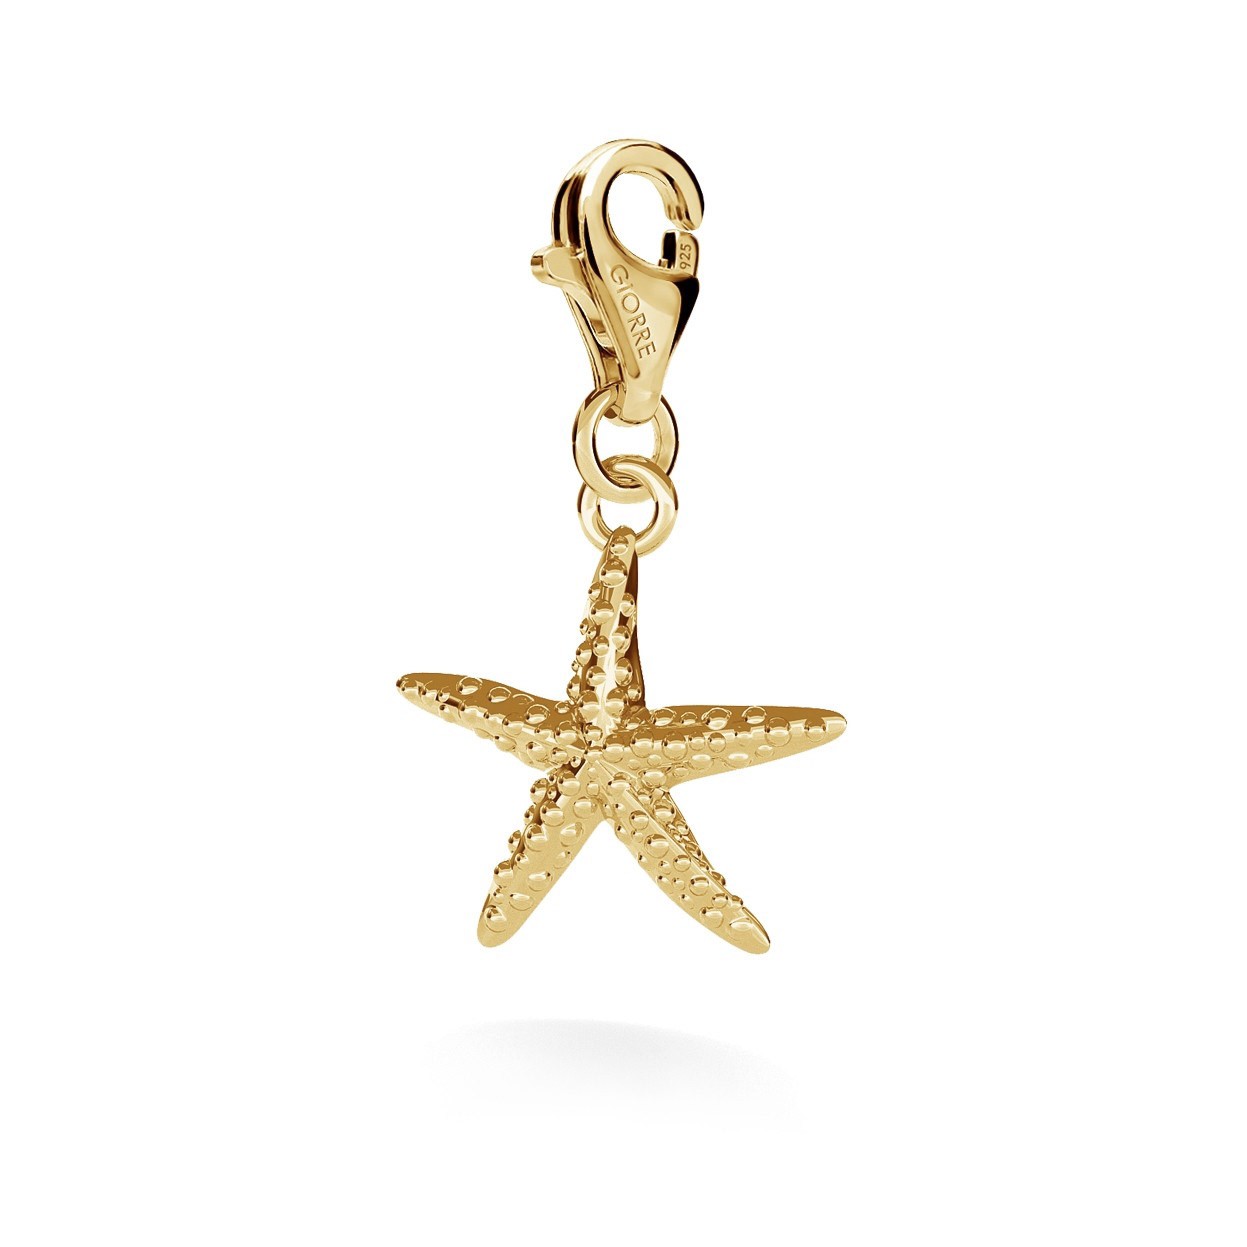 CHARM 19, STARFISH, SILVER 925,  RHODIUM OR GOLD PLATED